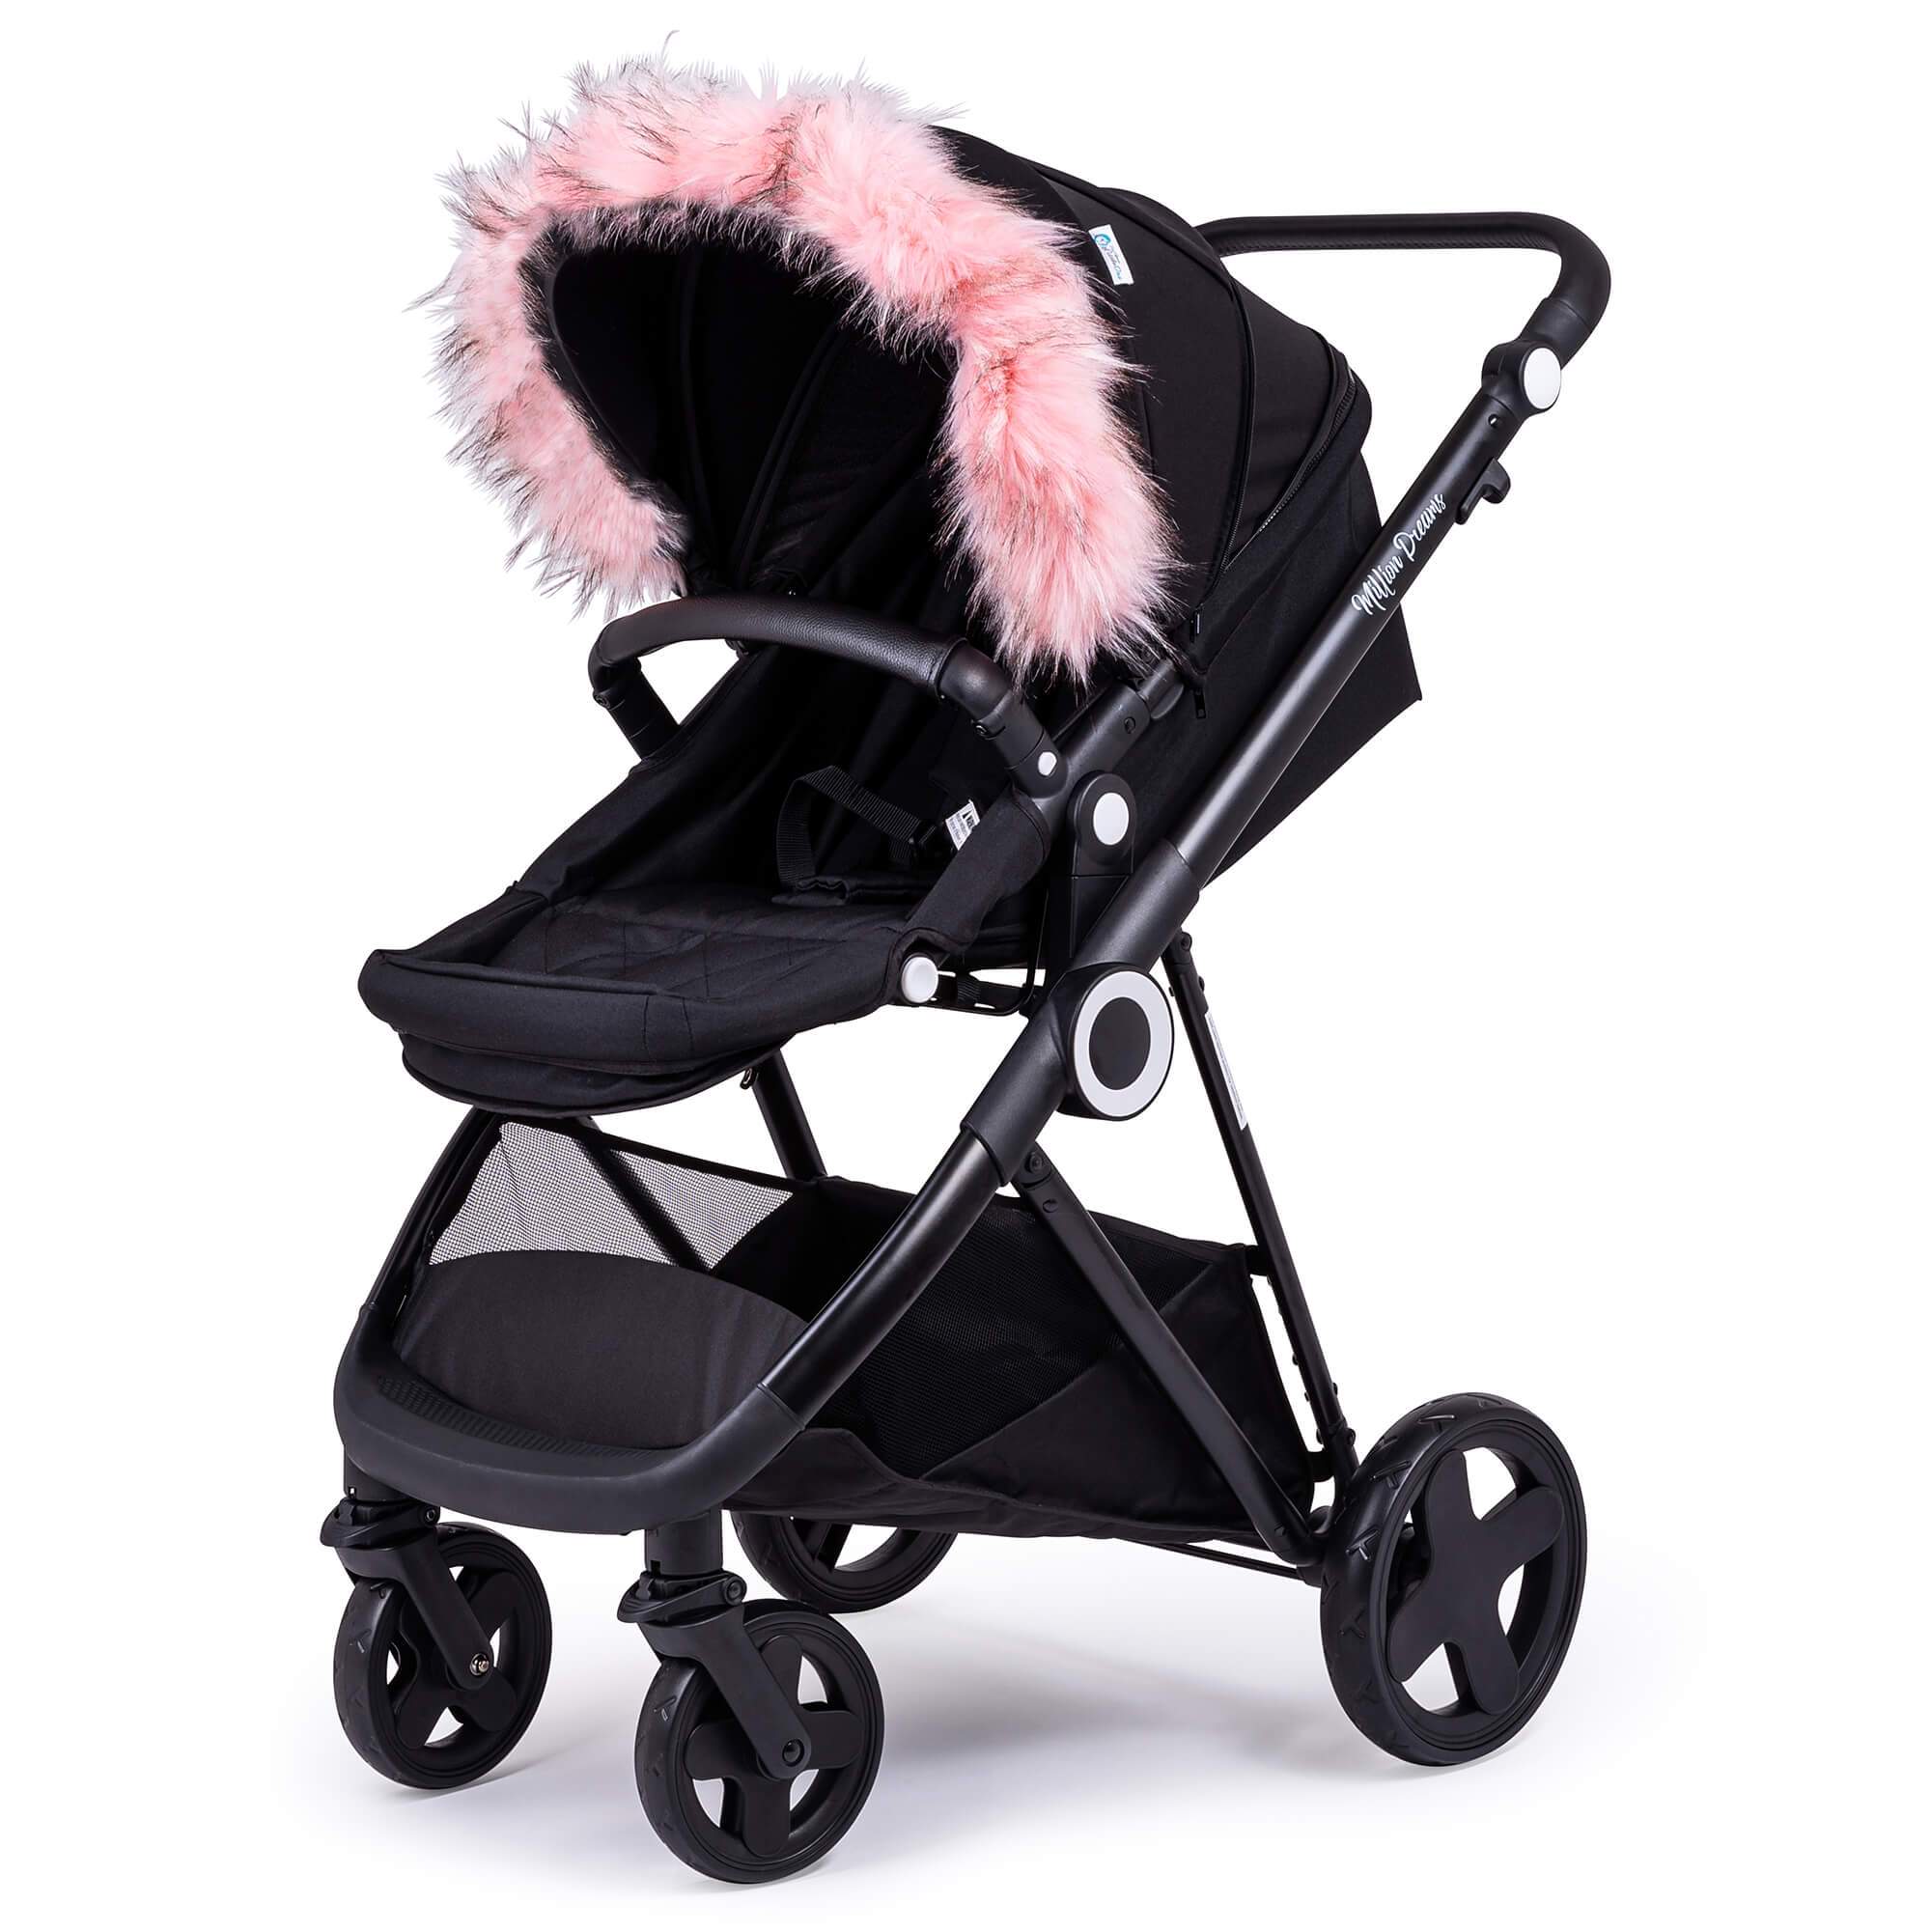 Pram Fur Hood Trim Attachment for Pushchair Compatible with Esprit - Light Pink / Fits All Models | For Your Little One